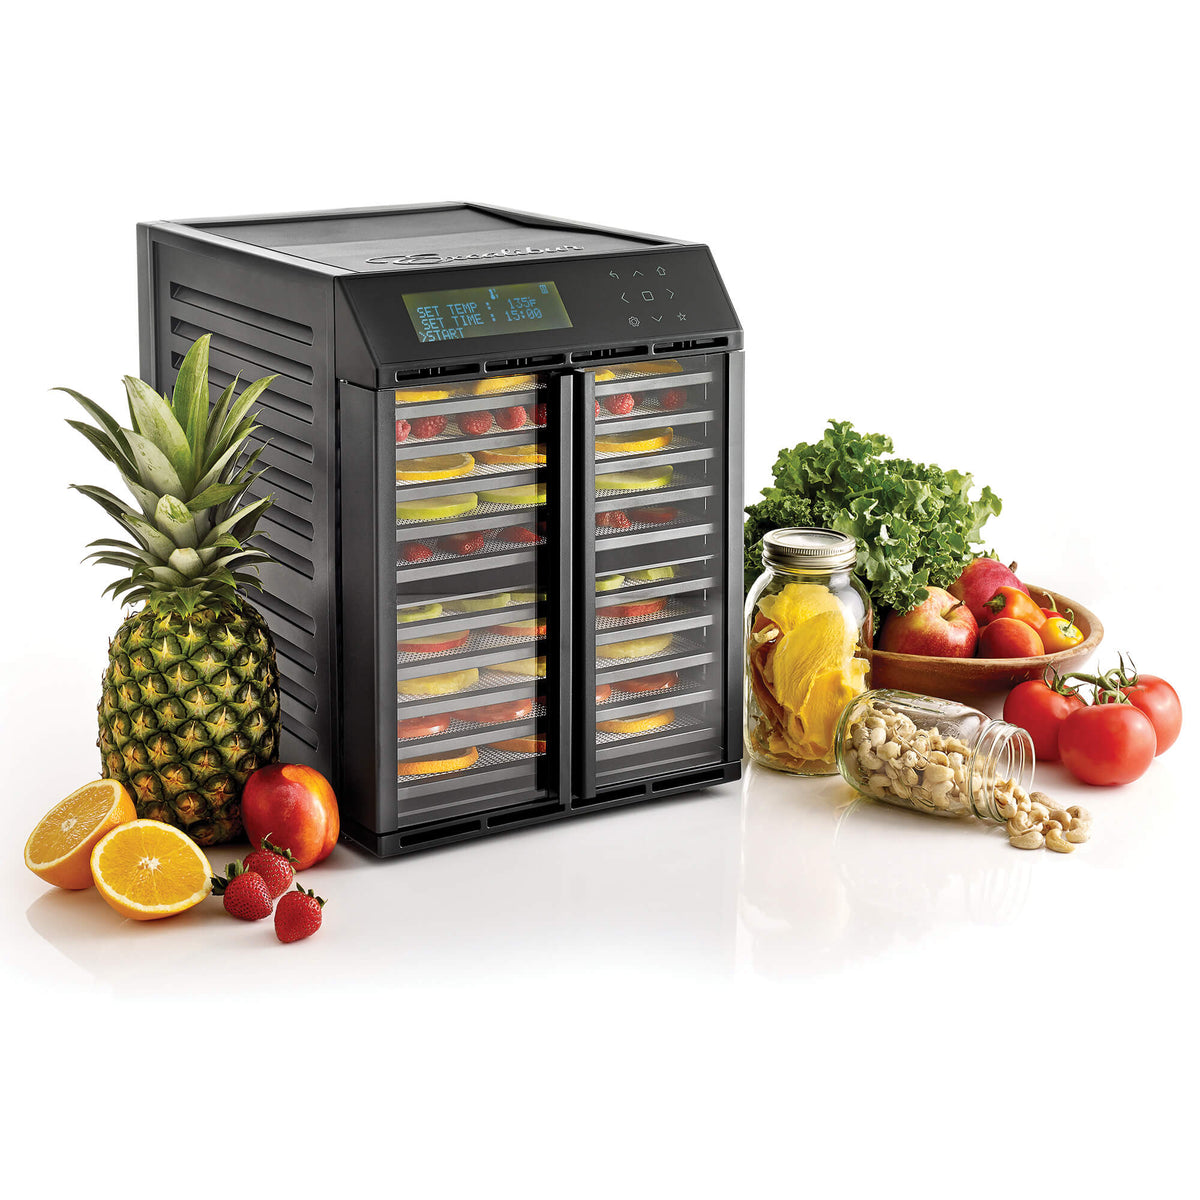 Excalibur RES10 10 tray compact digital dehydrator with clear hinged doors closed and food on the trays.